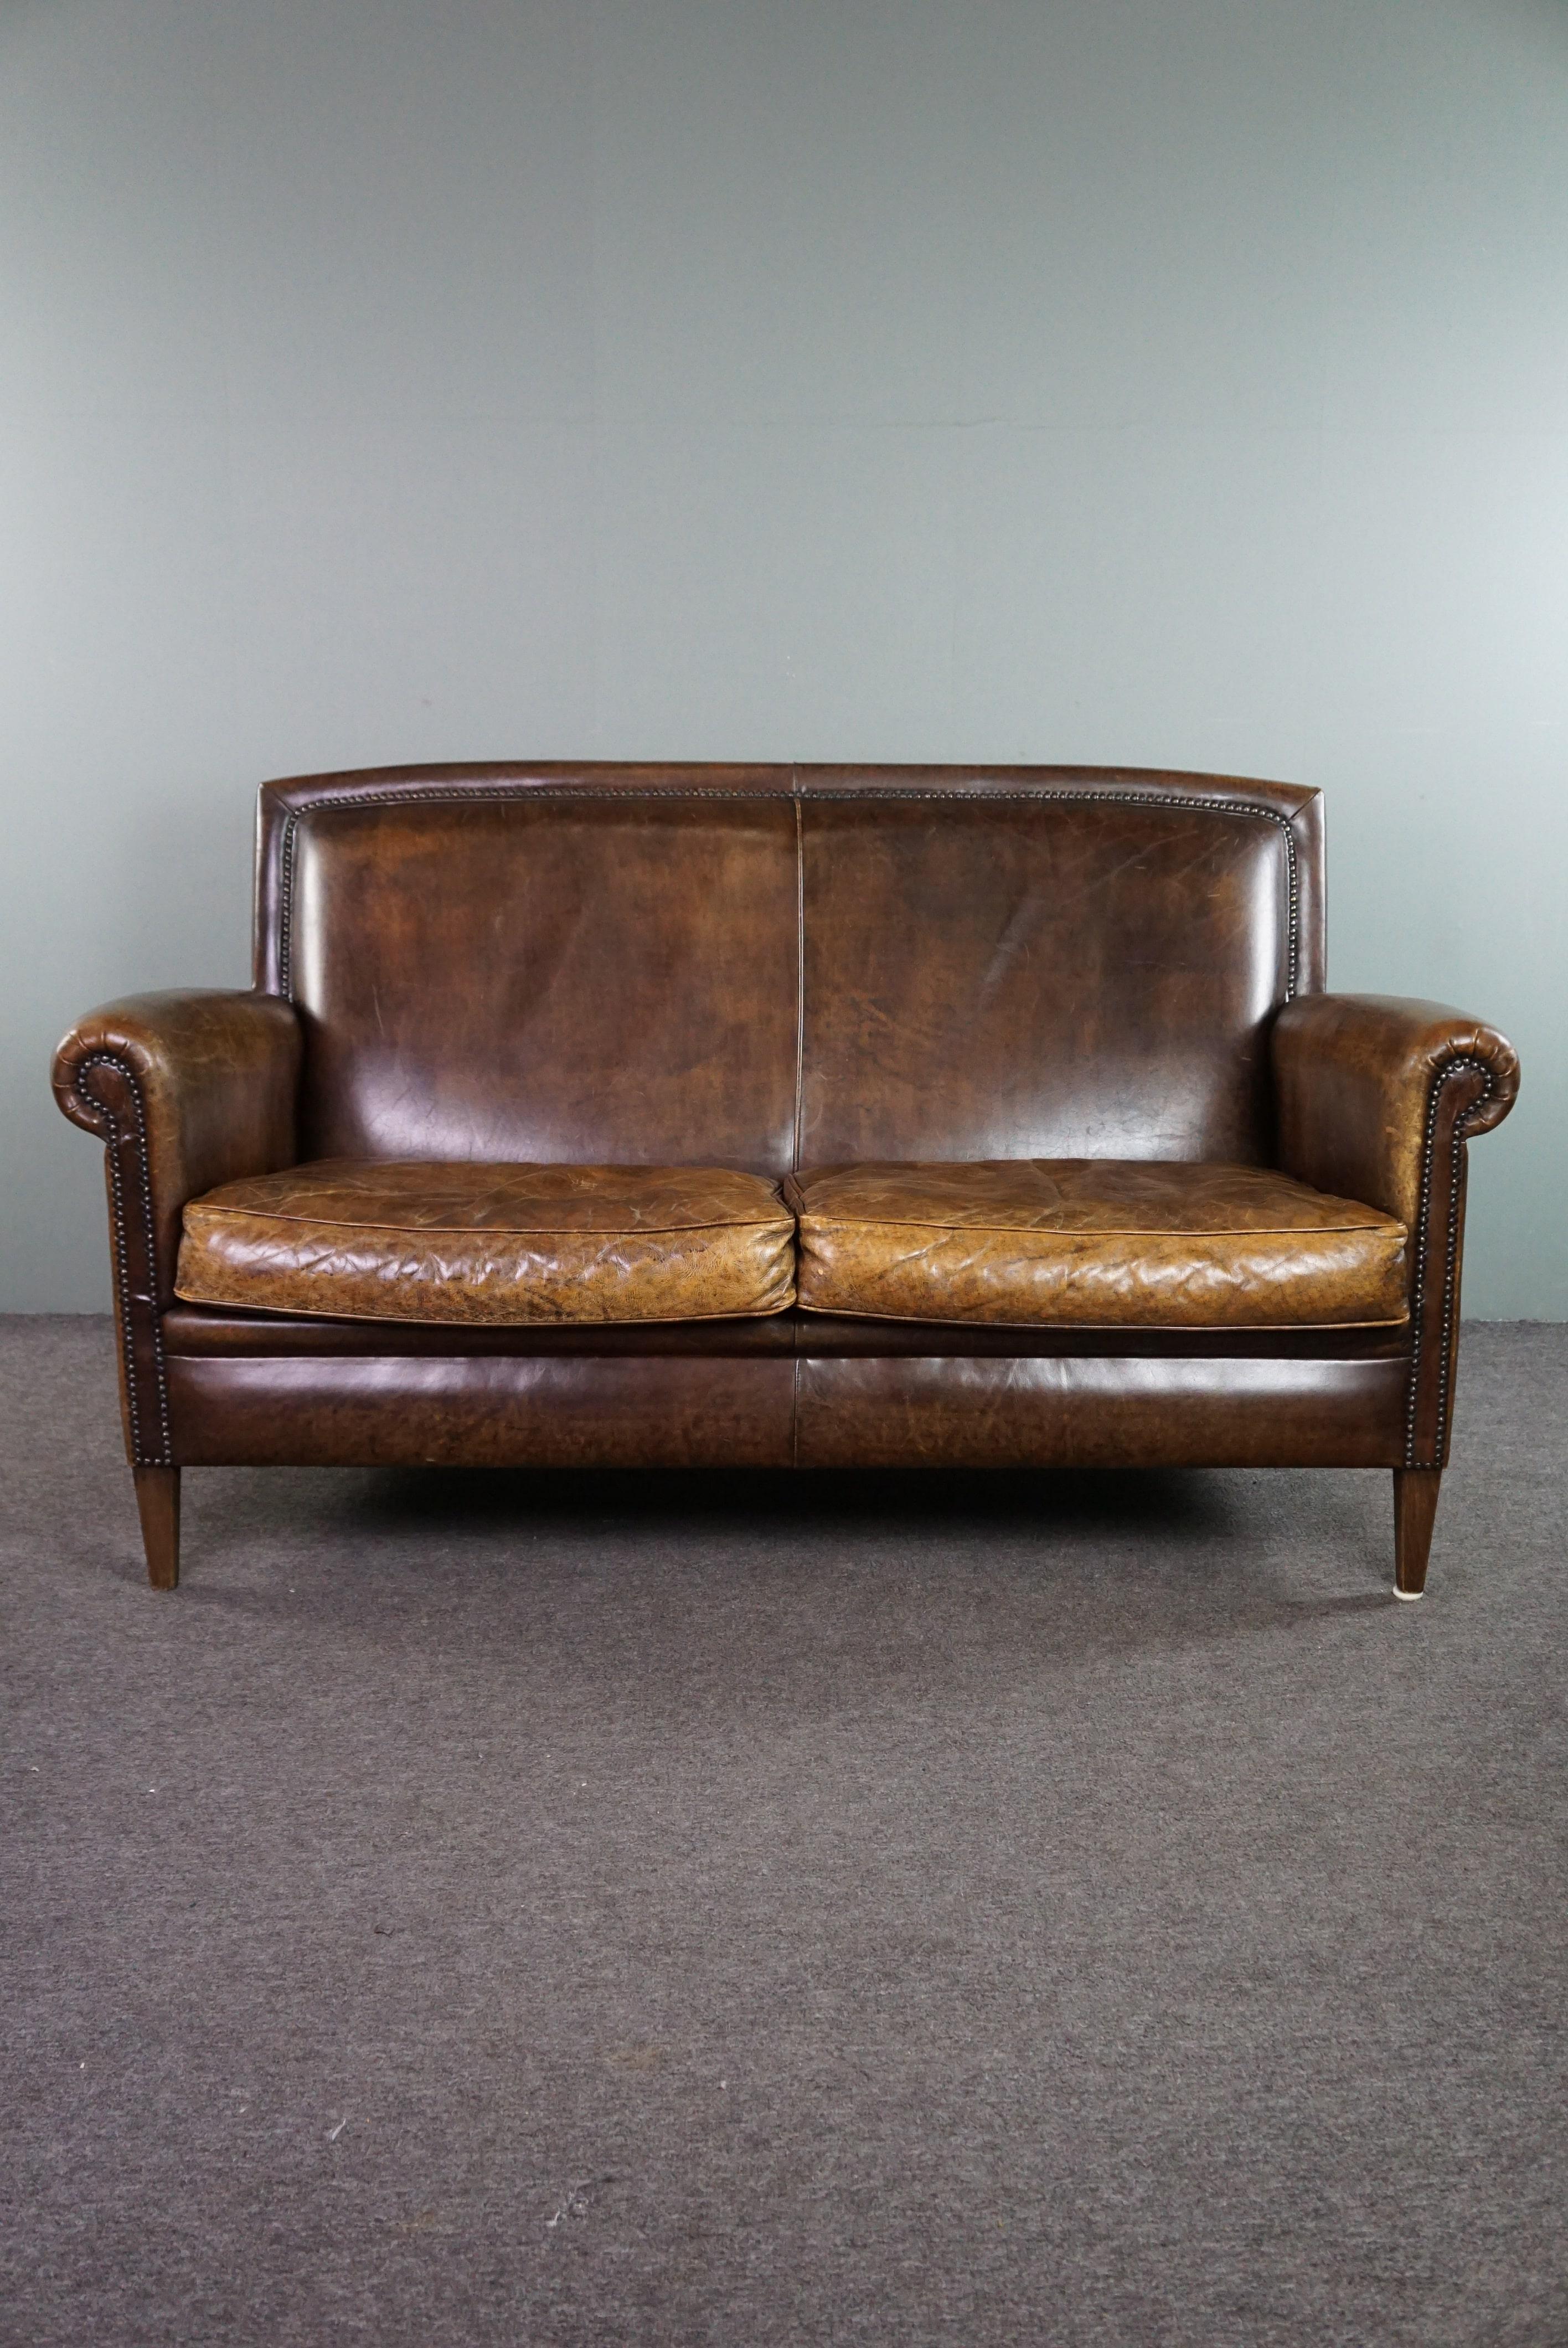 Offered: this beautiful and well-maintained dark cognac-colored cowhide 2-seater sofa in classic English style, finished with decorative studs.

This lovely sofa has a solid and dignified appearance, and it feels just as good as it looks. The